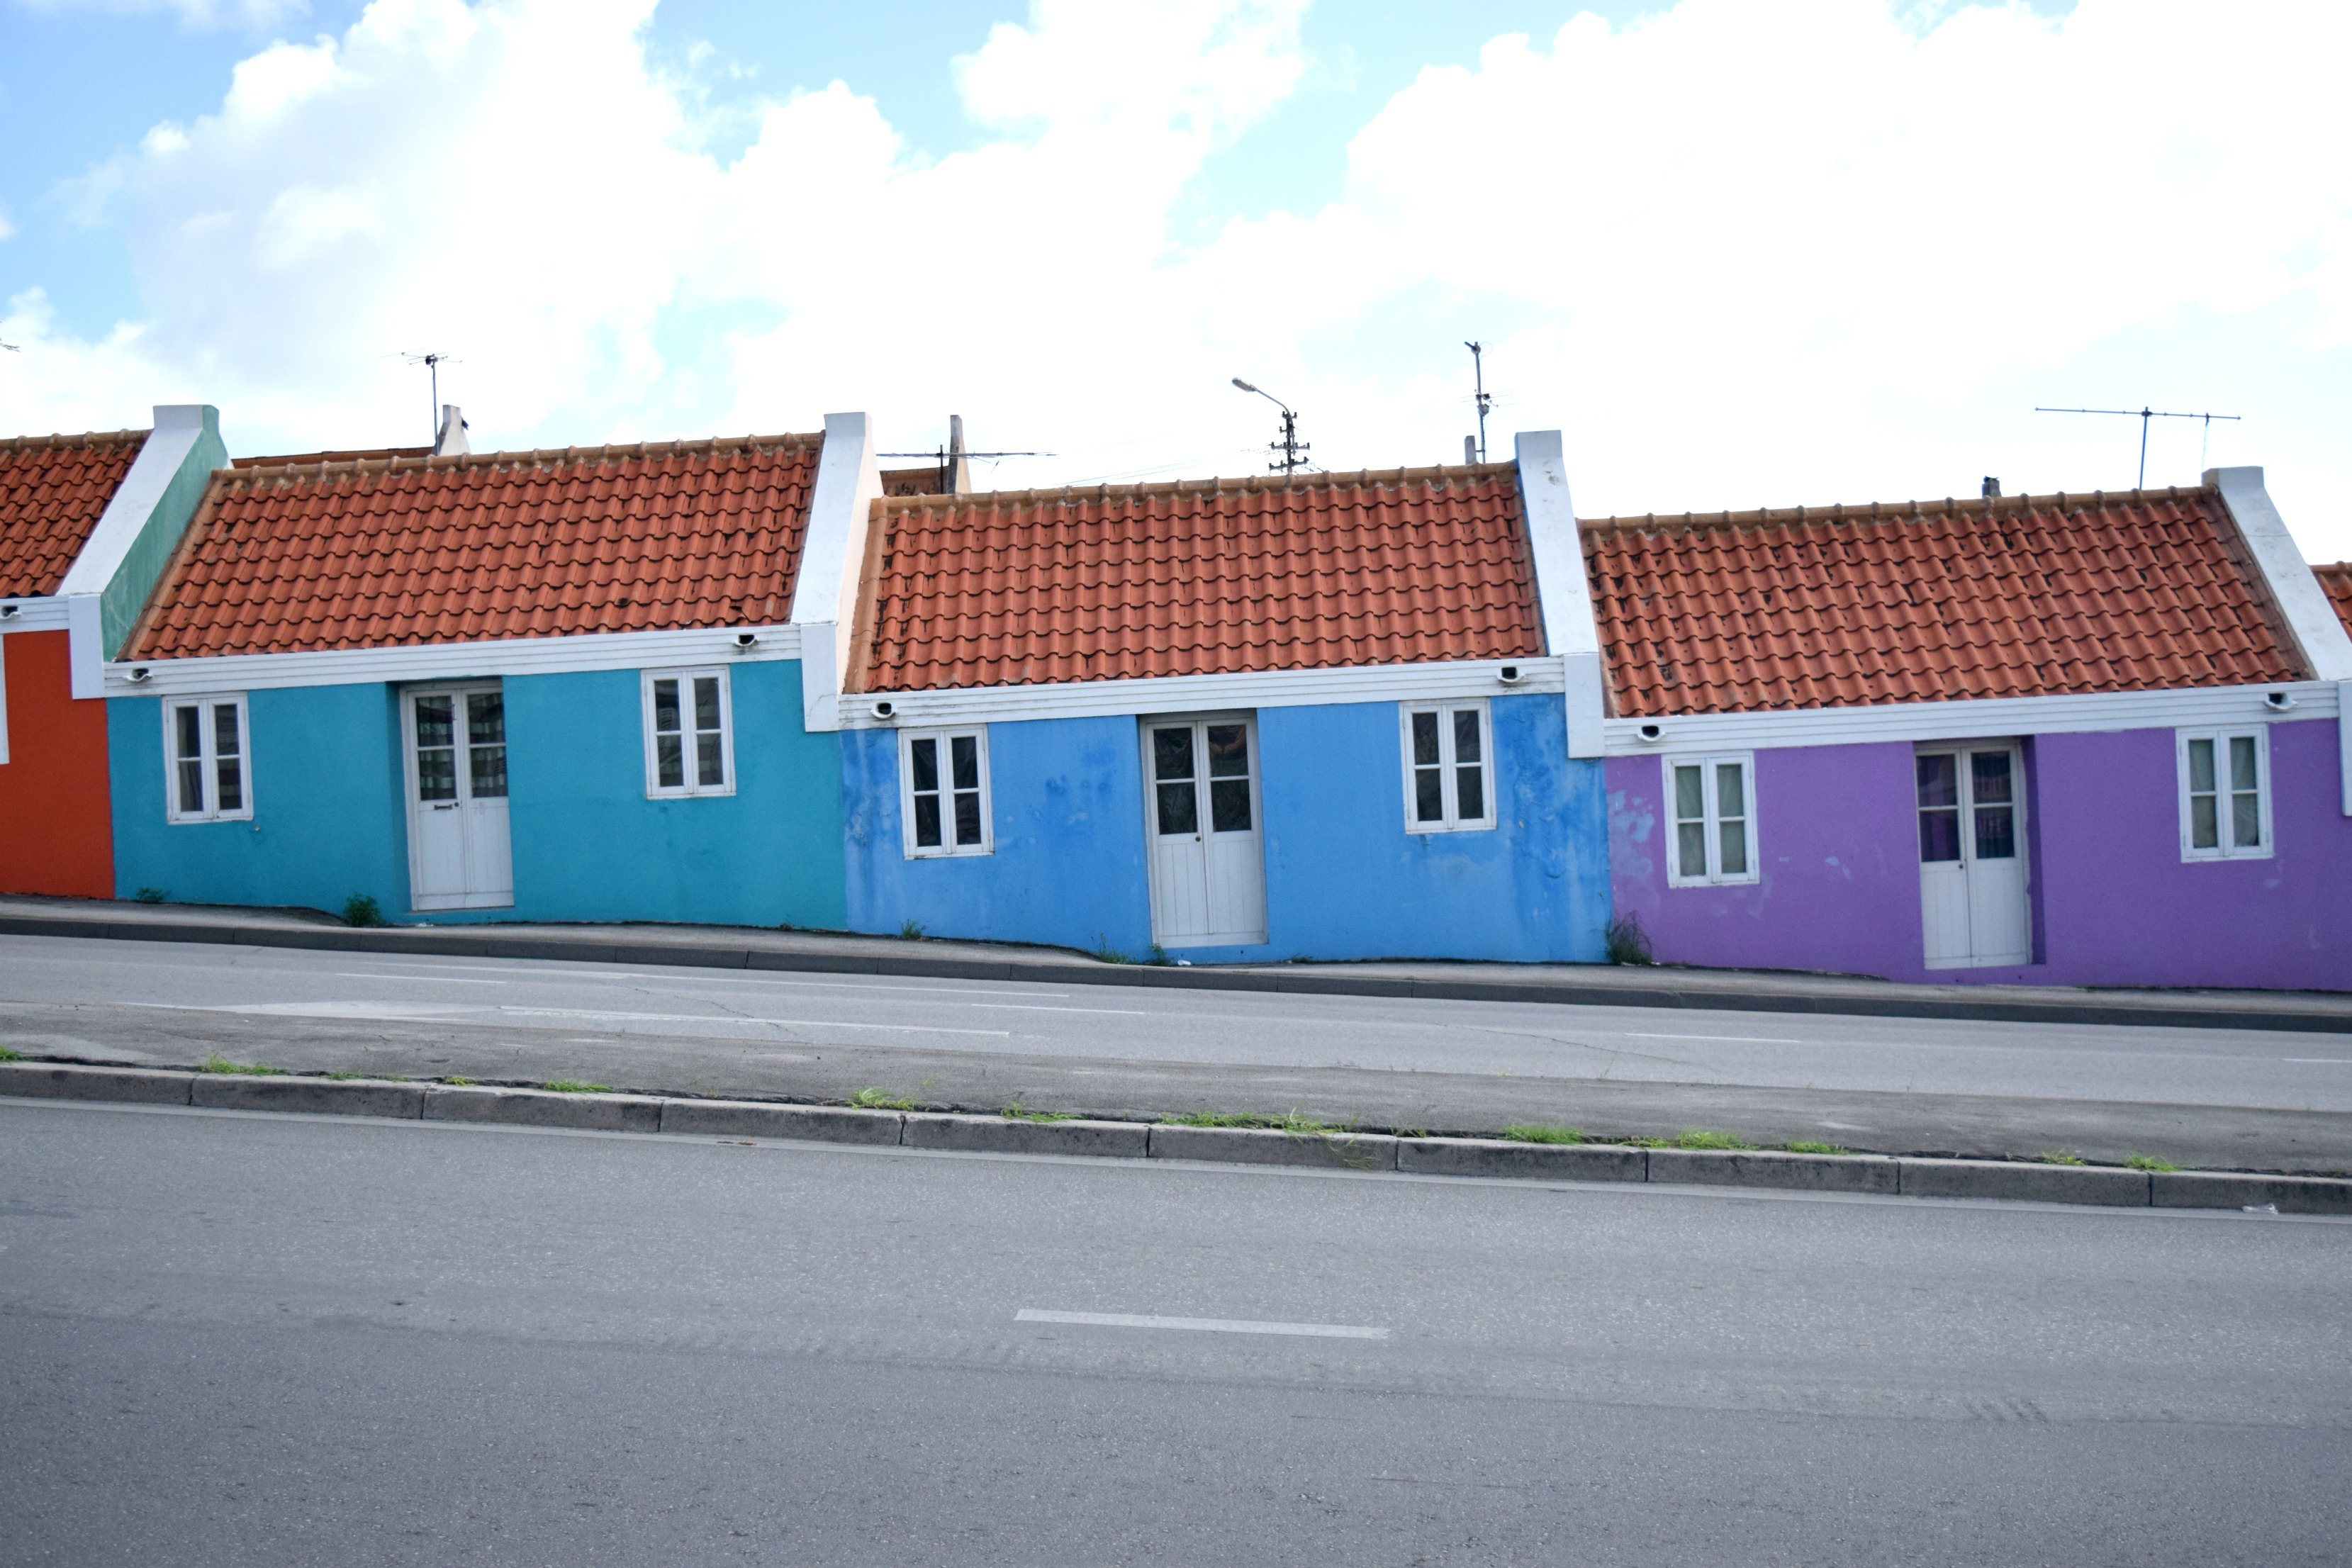 vibrant-colors-willemstad-curacao-17